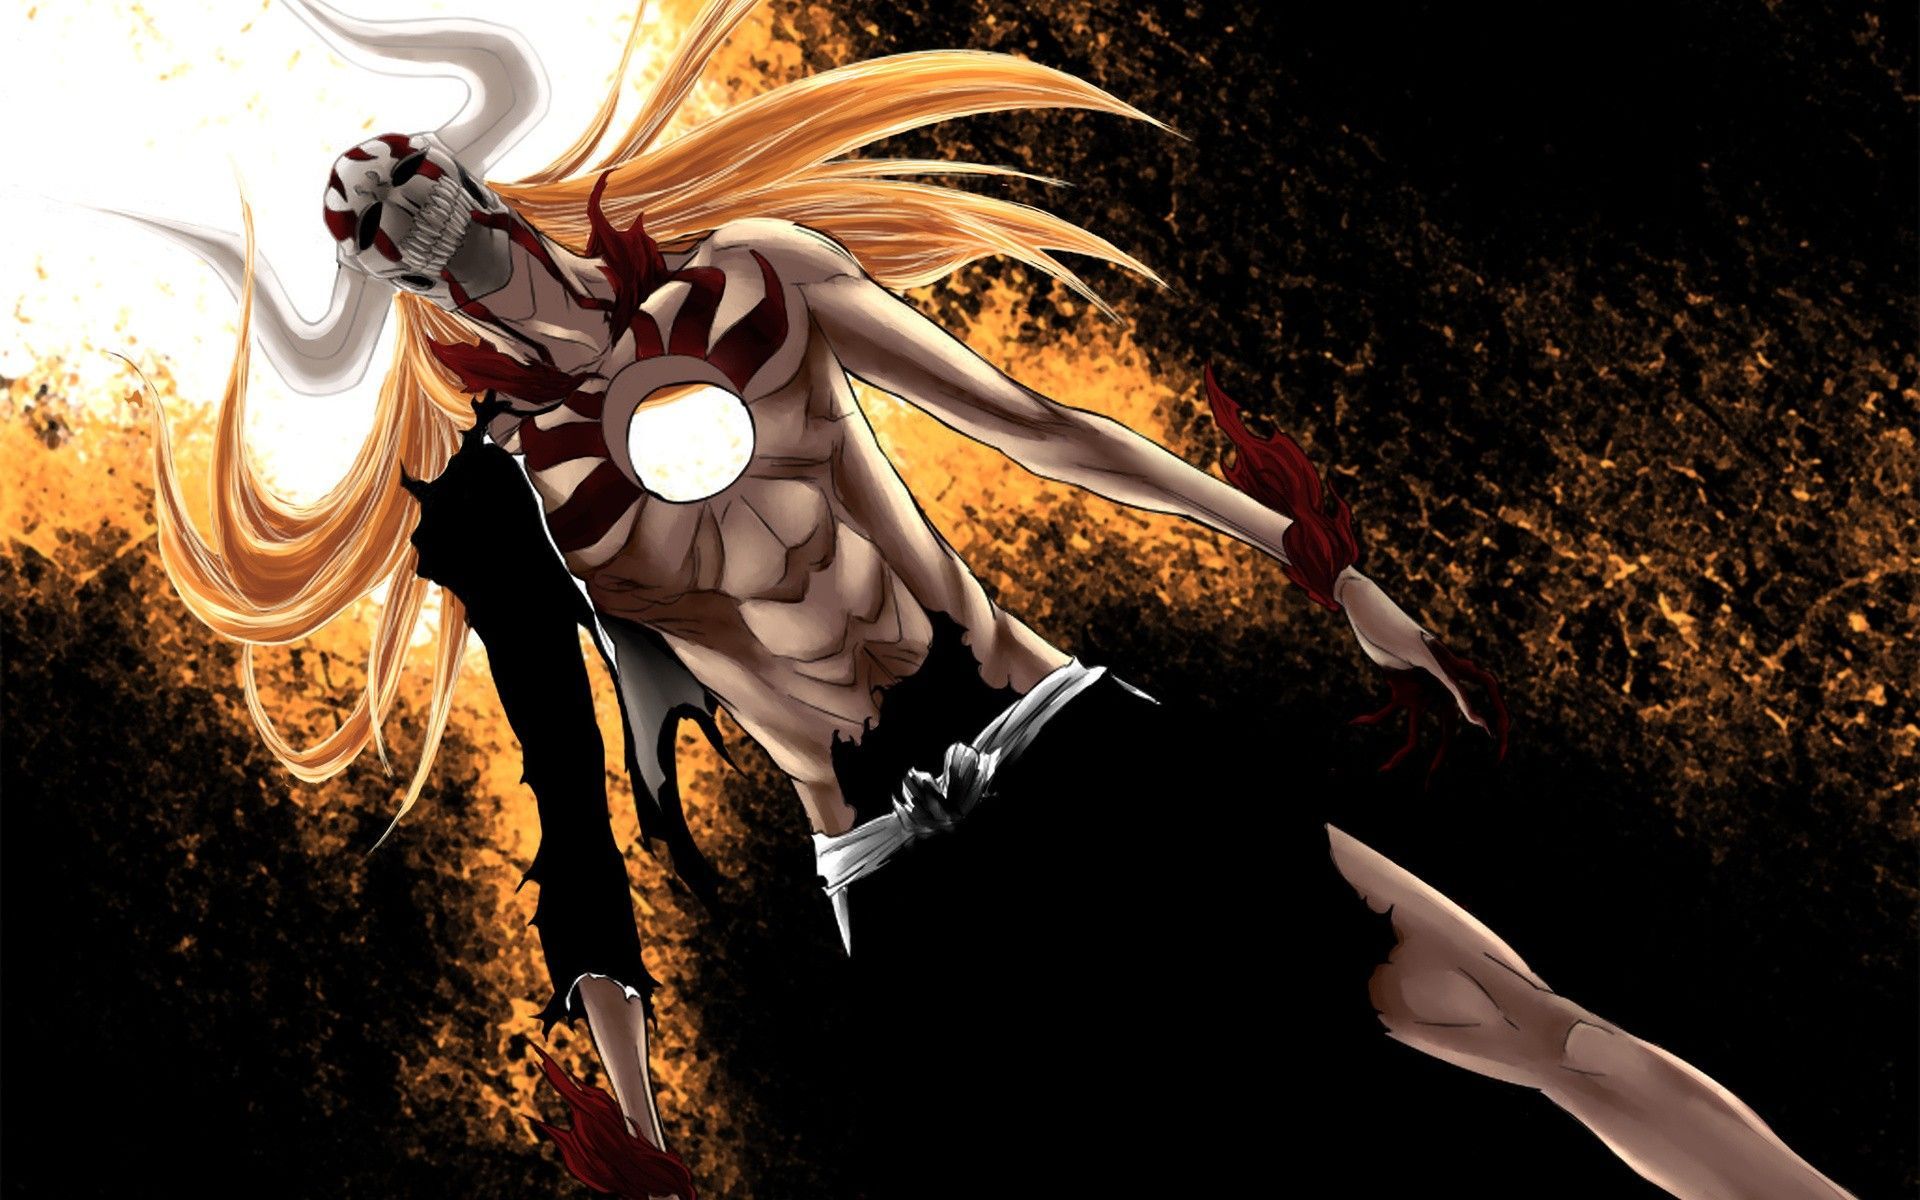 Bleach HD wallpapers - great new desktop background for your screen